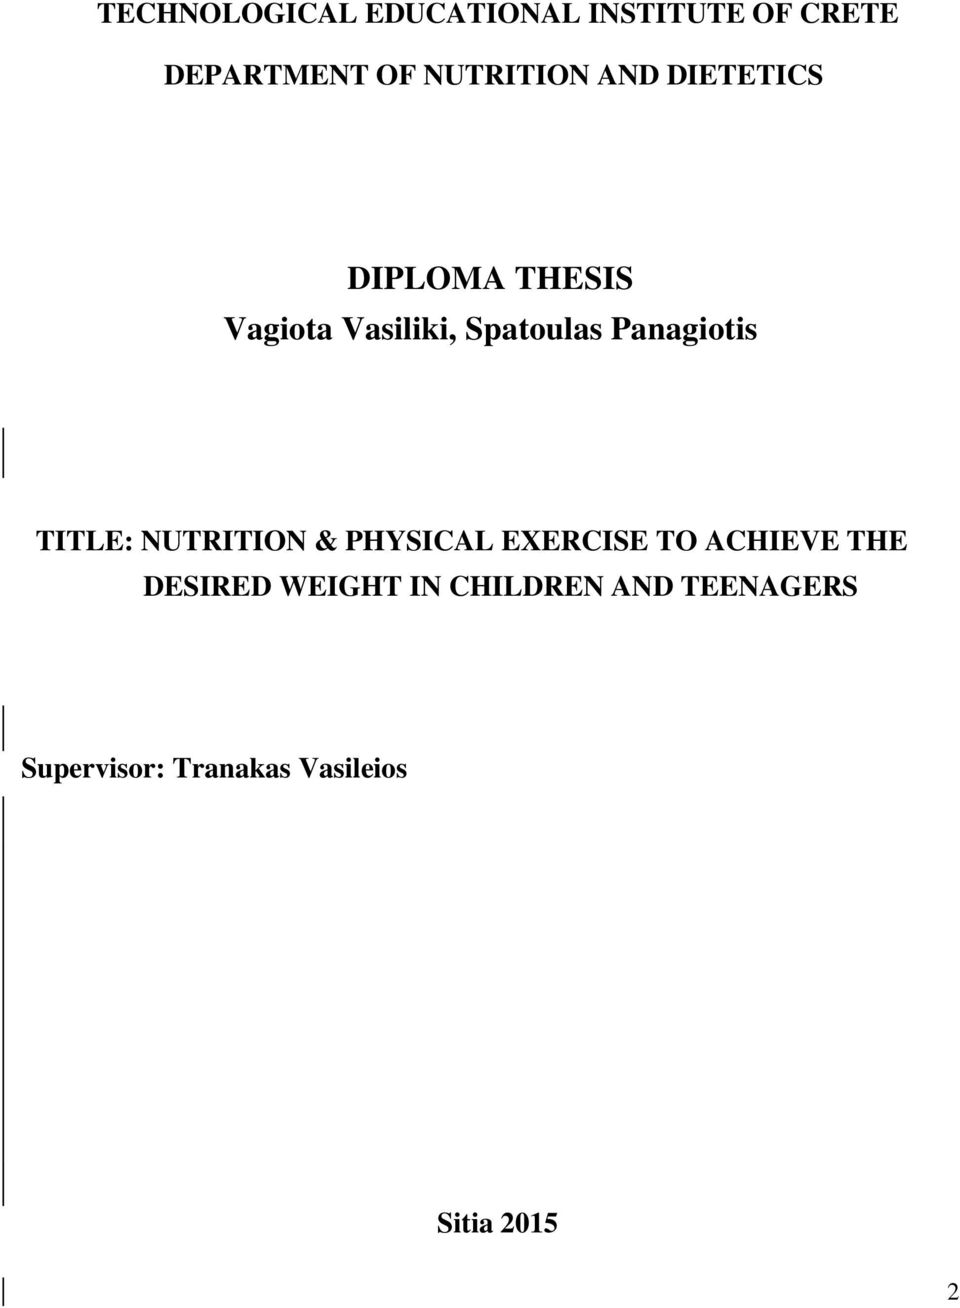 TITLE: NUTRITION & PHYSICAL EXERCISE TO ACHIEVE THE DESIRED WEIGHT